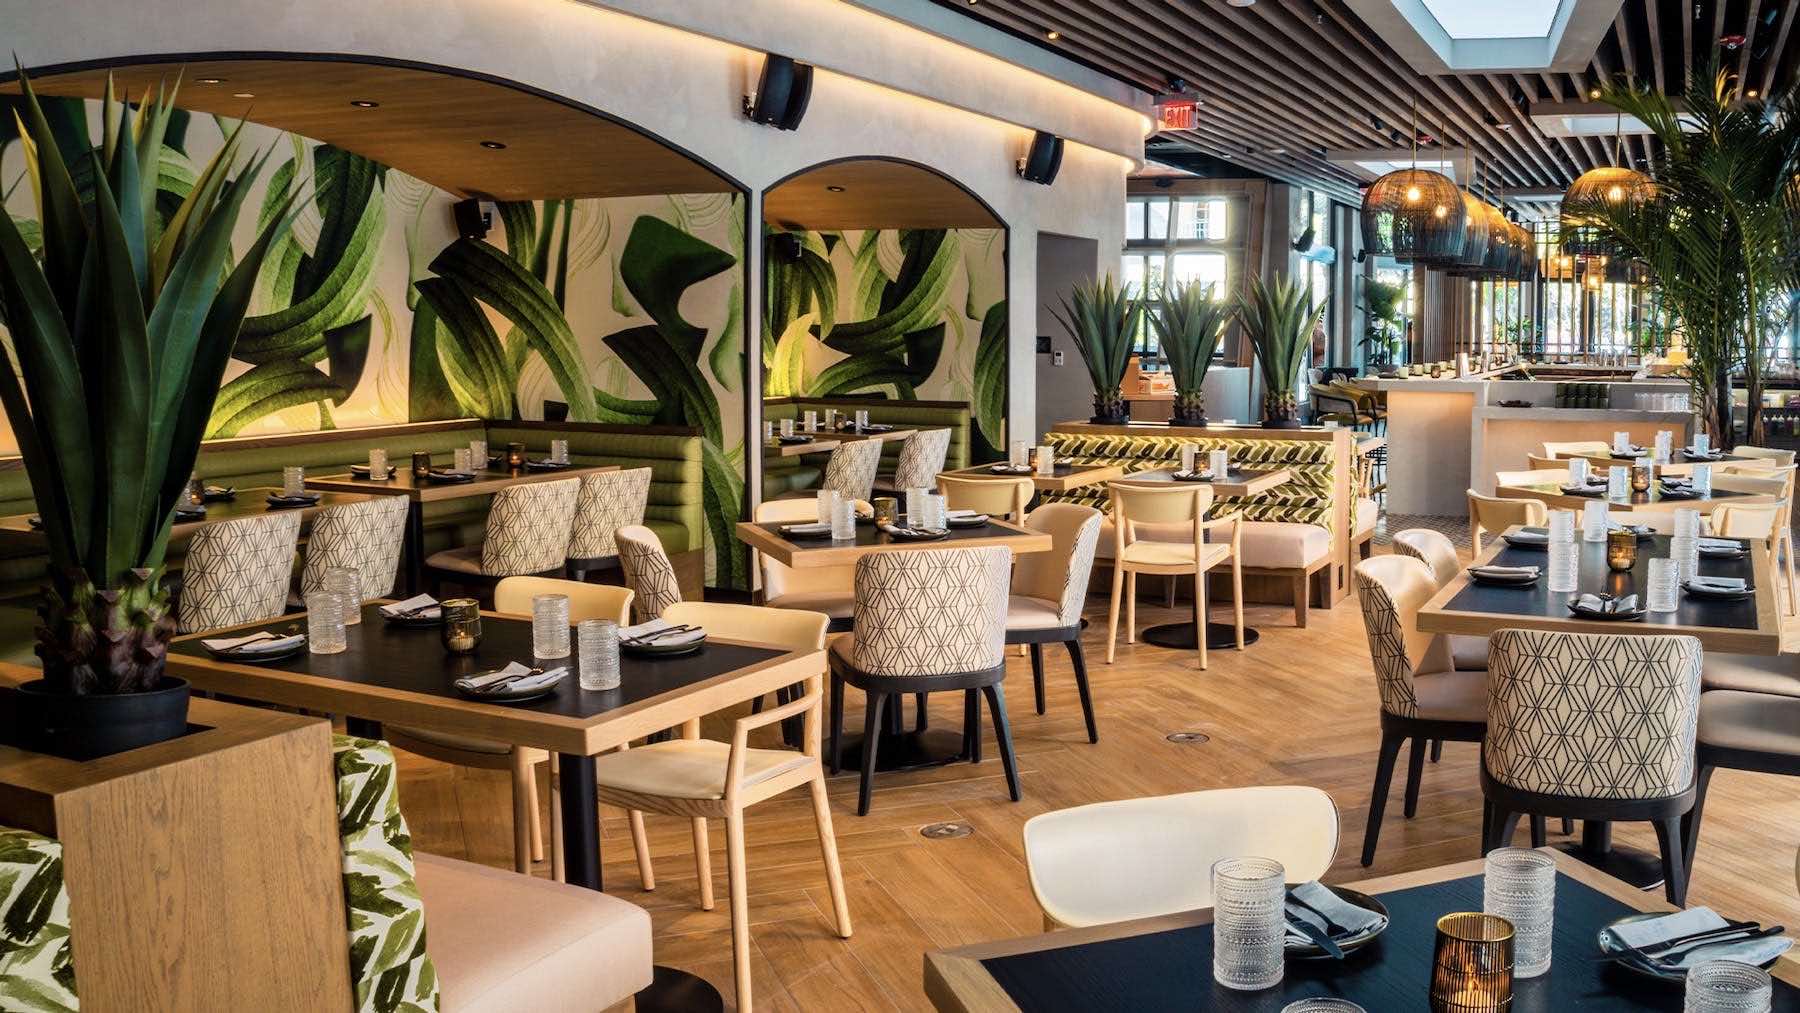 PLANTA Yorkville is the best vegan restaurants in Yorkville interior with tables and chairs